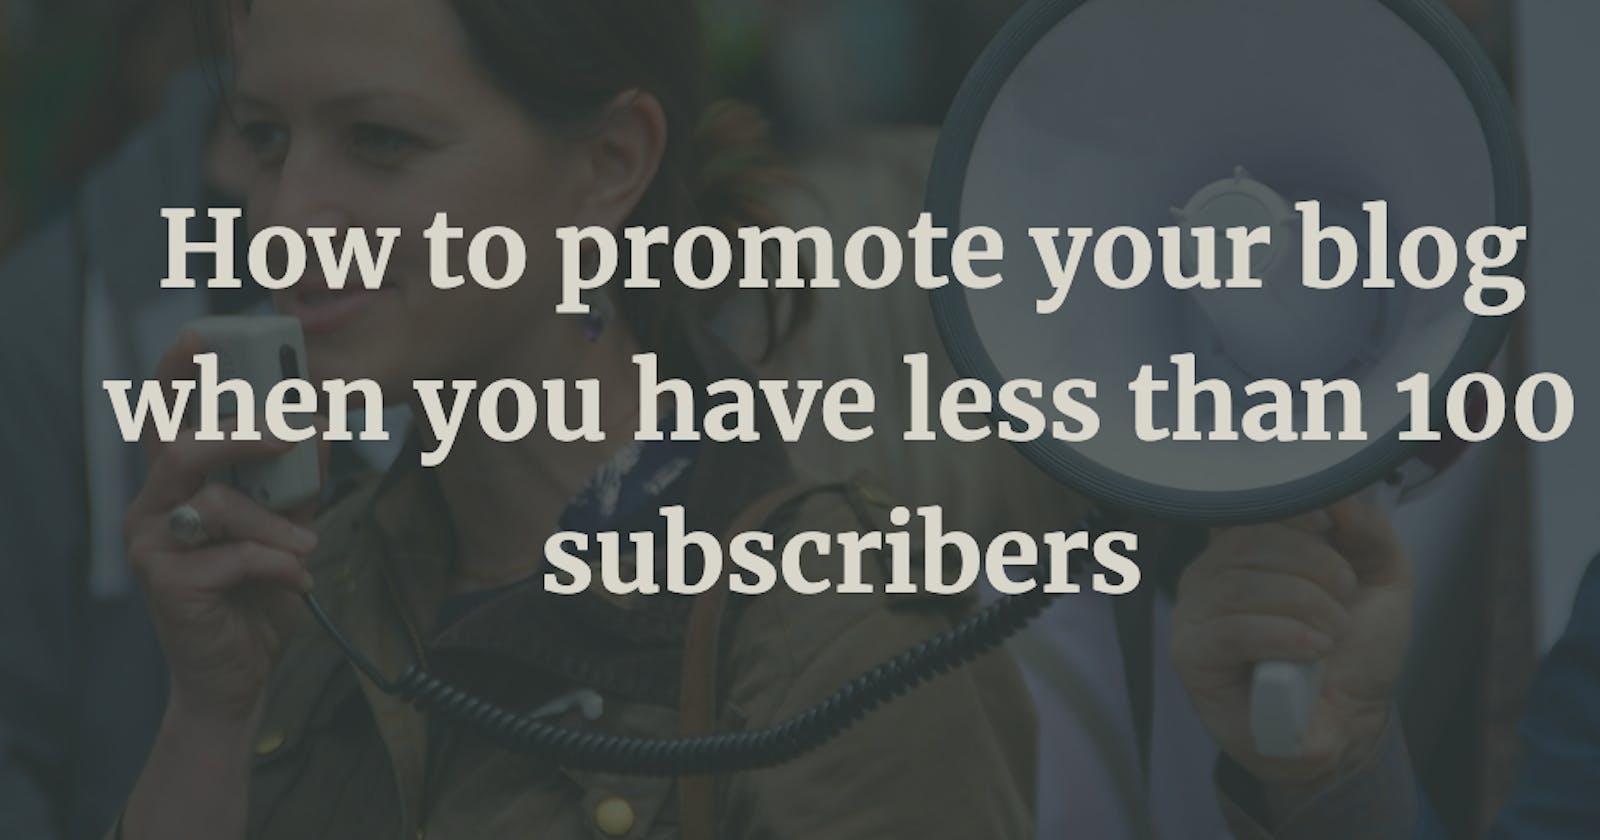 How to promote your blog when you have less than 100 subscribers